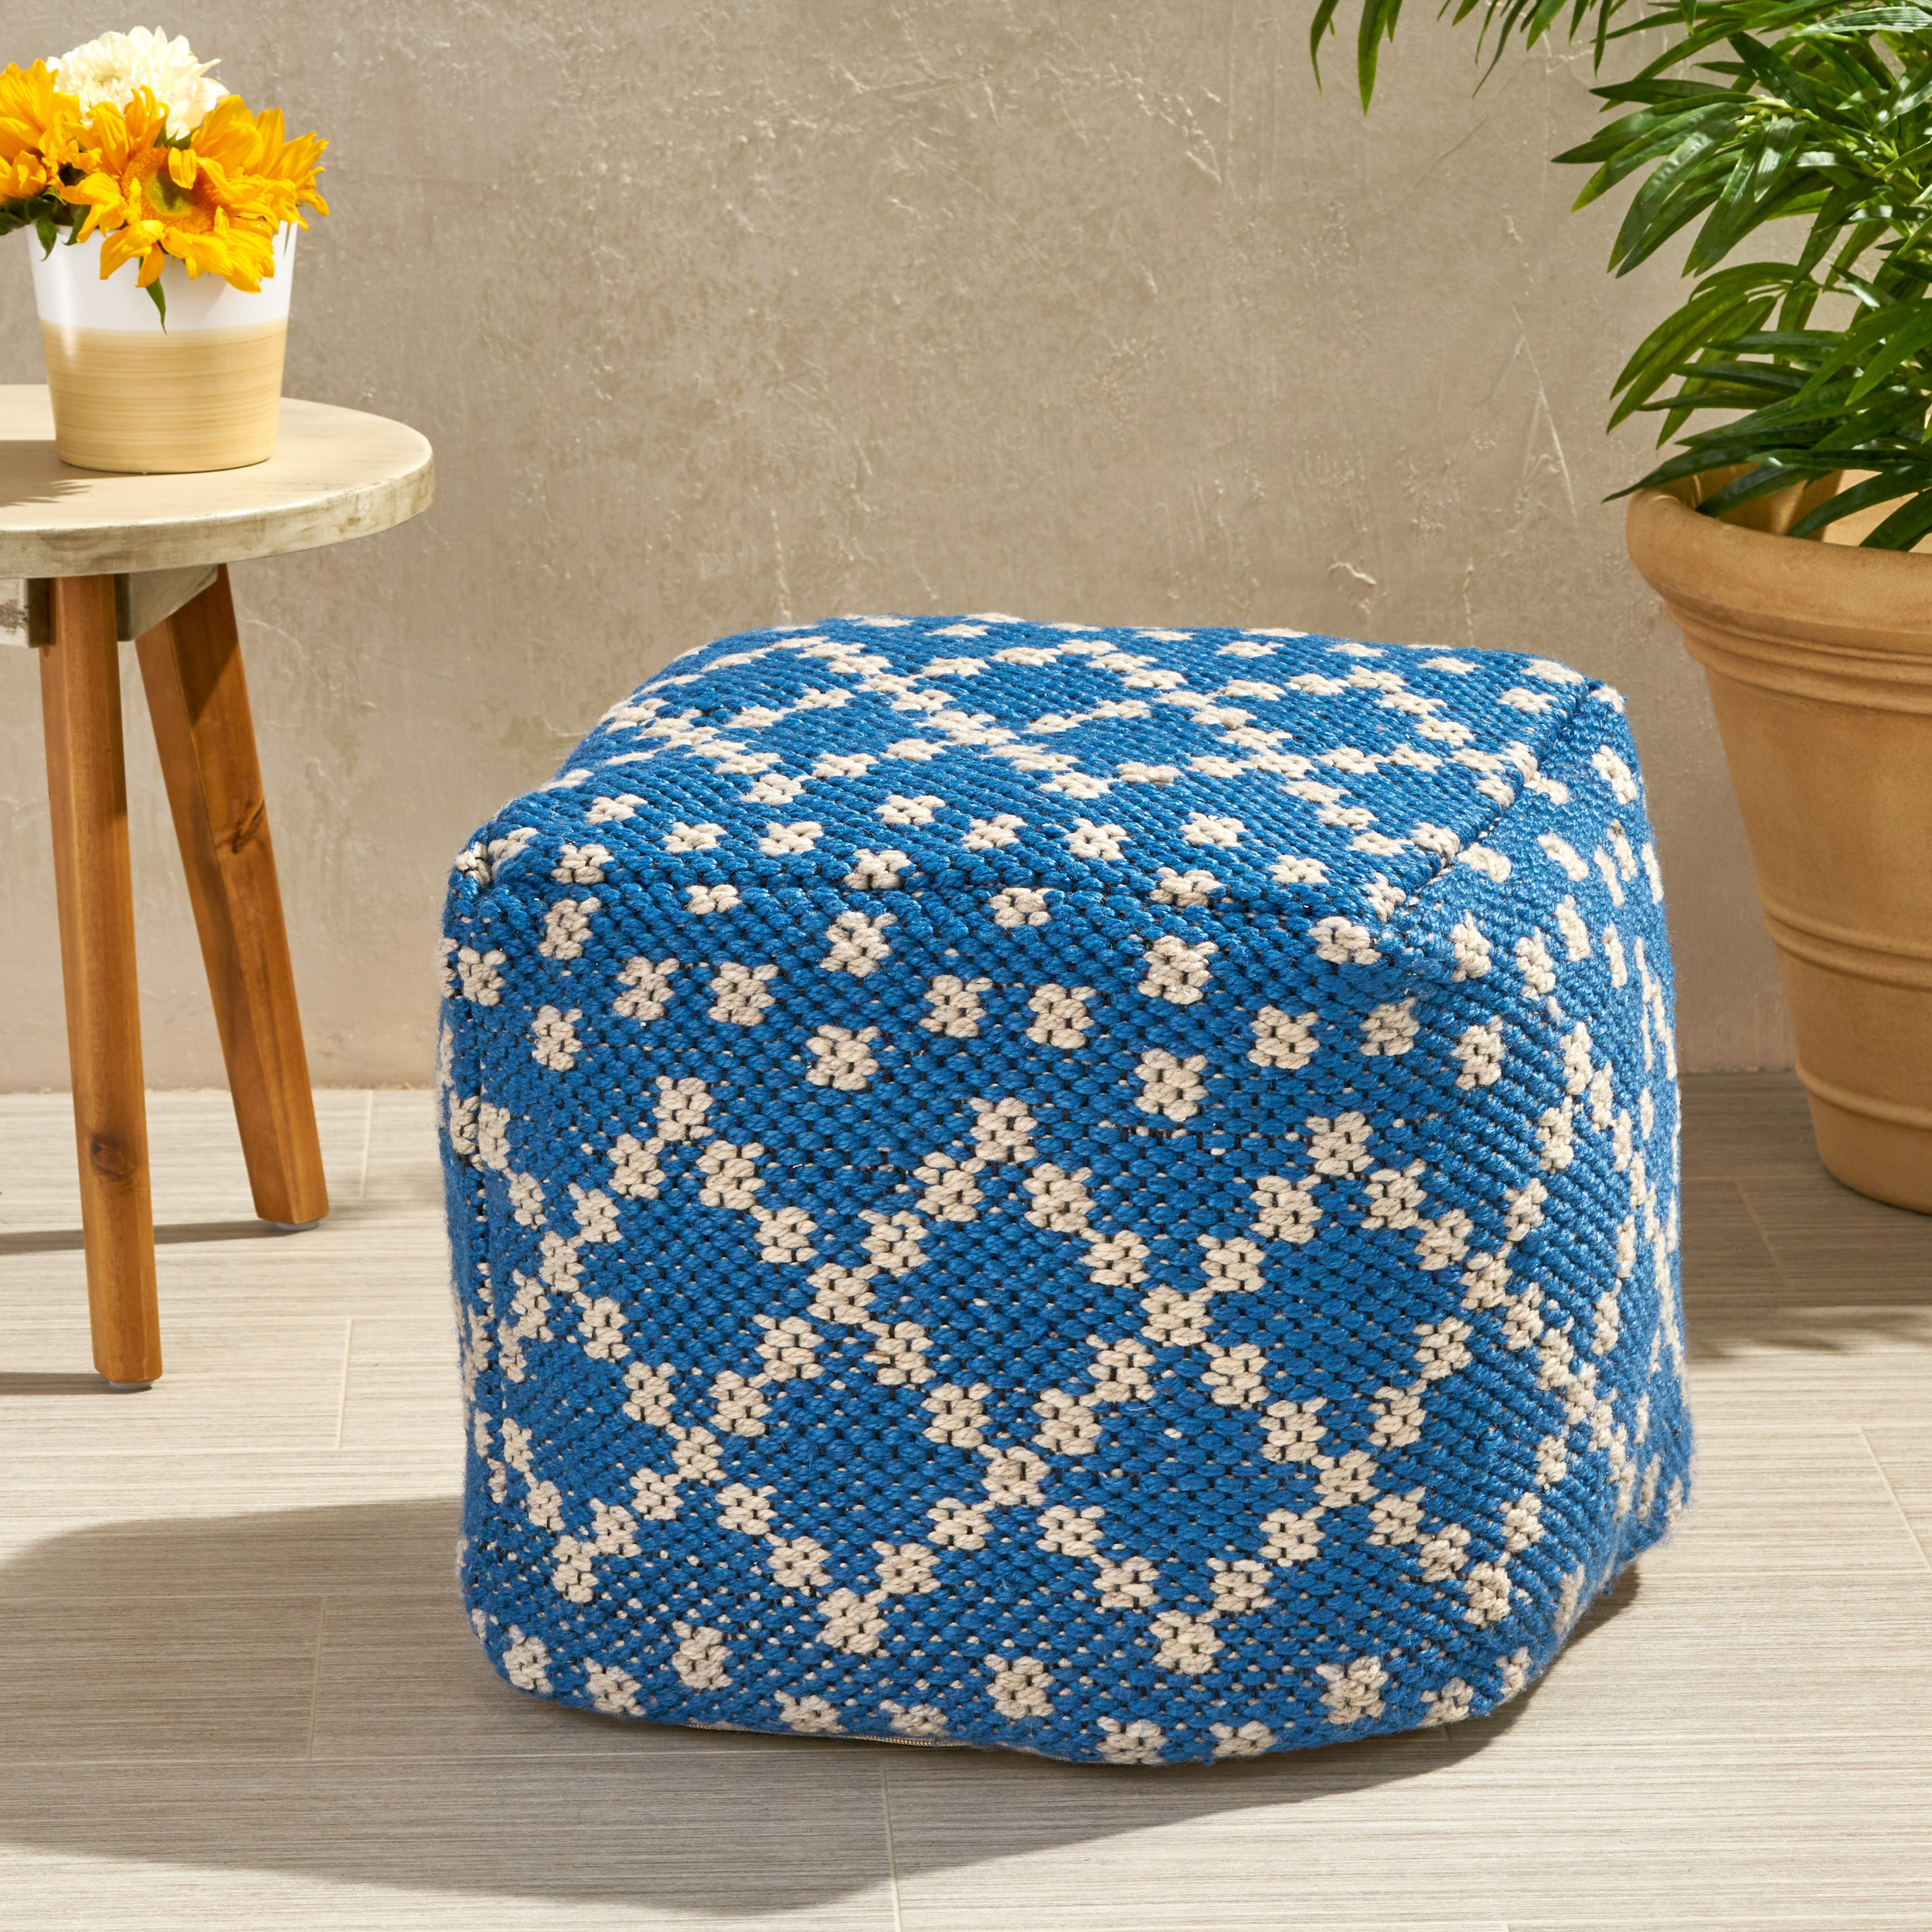 Ophelia Outdoor Handcrafted Boho Fabric Cube Pouf, Blue and White - image 2 of 6